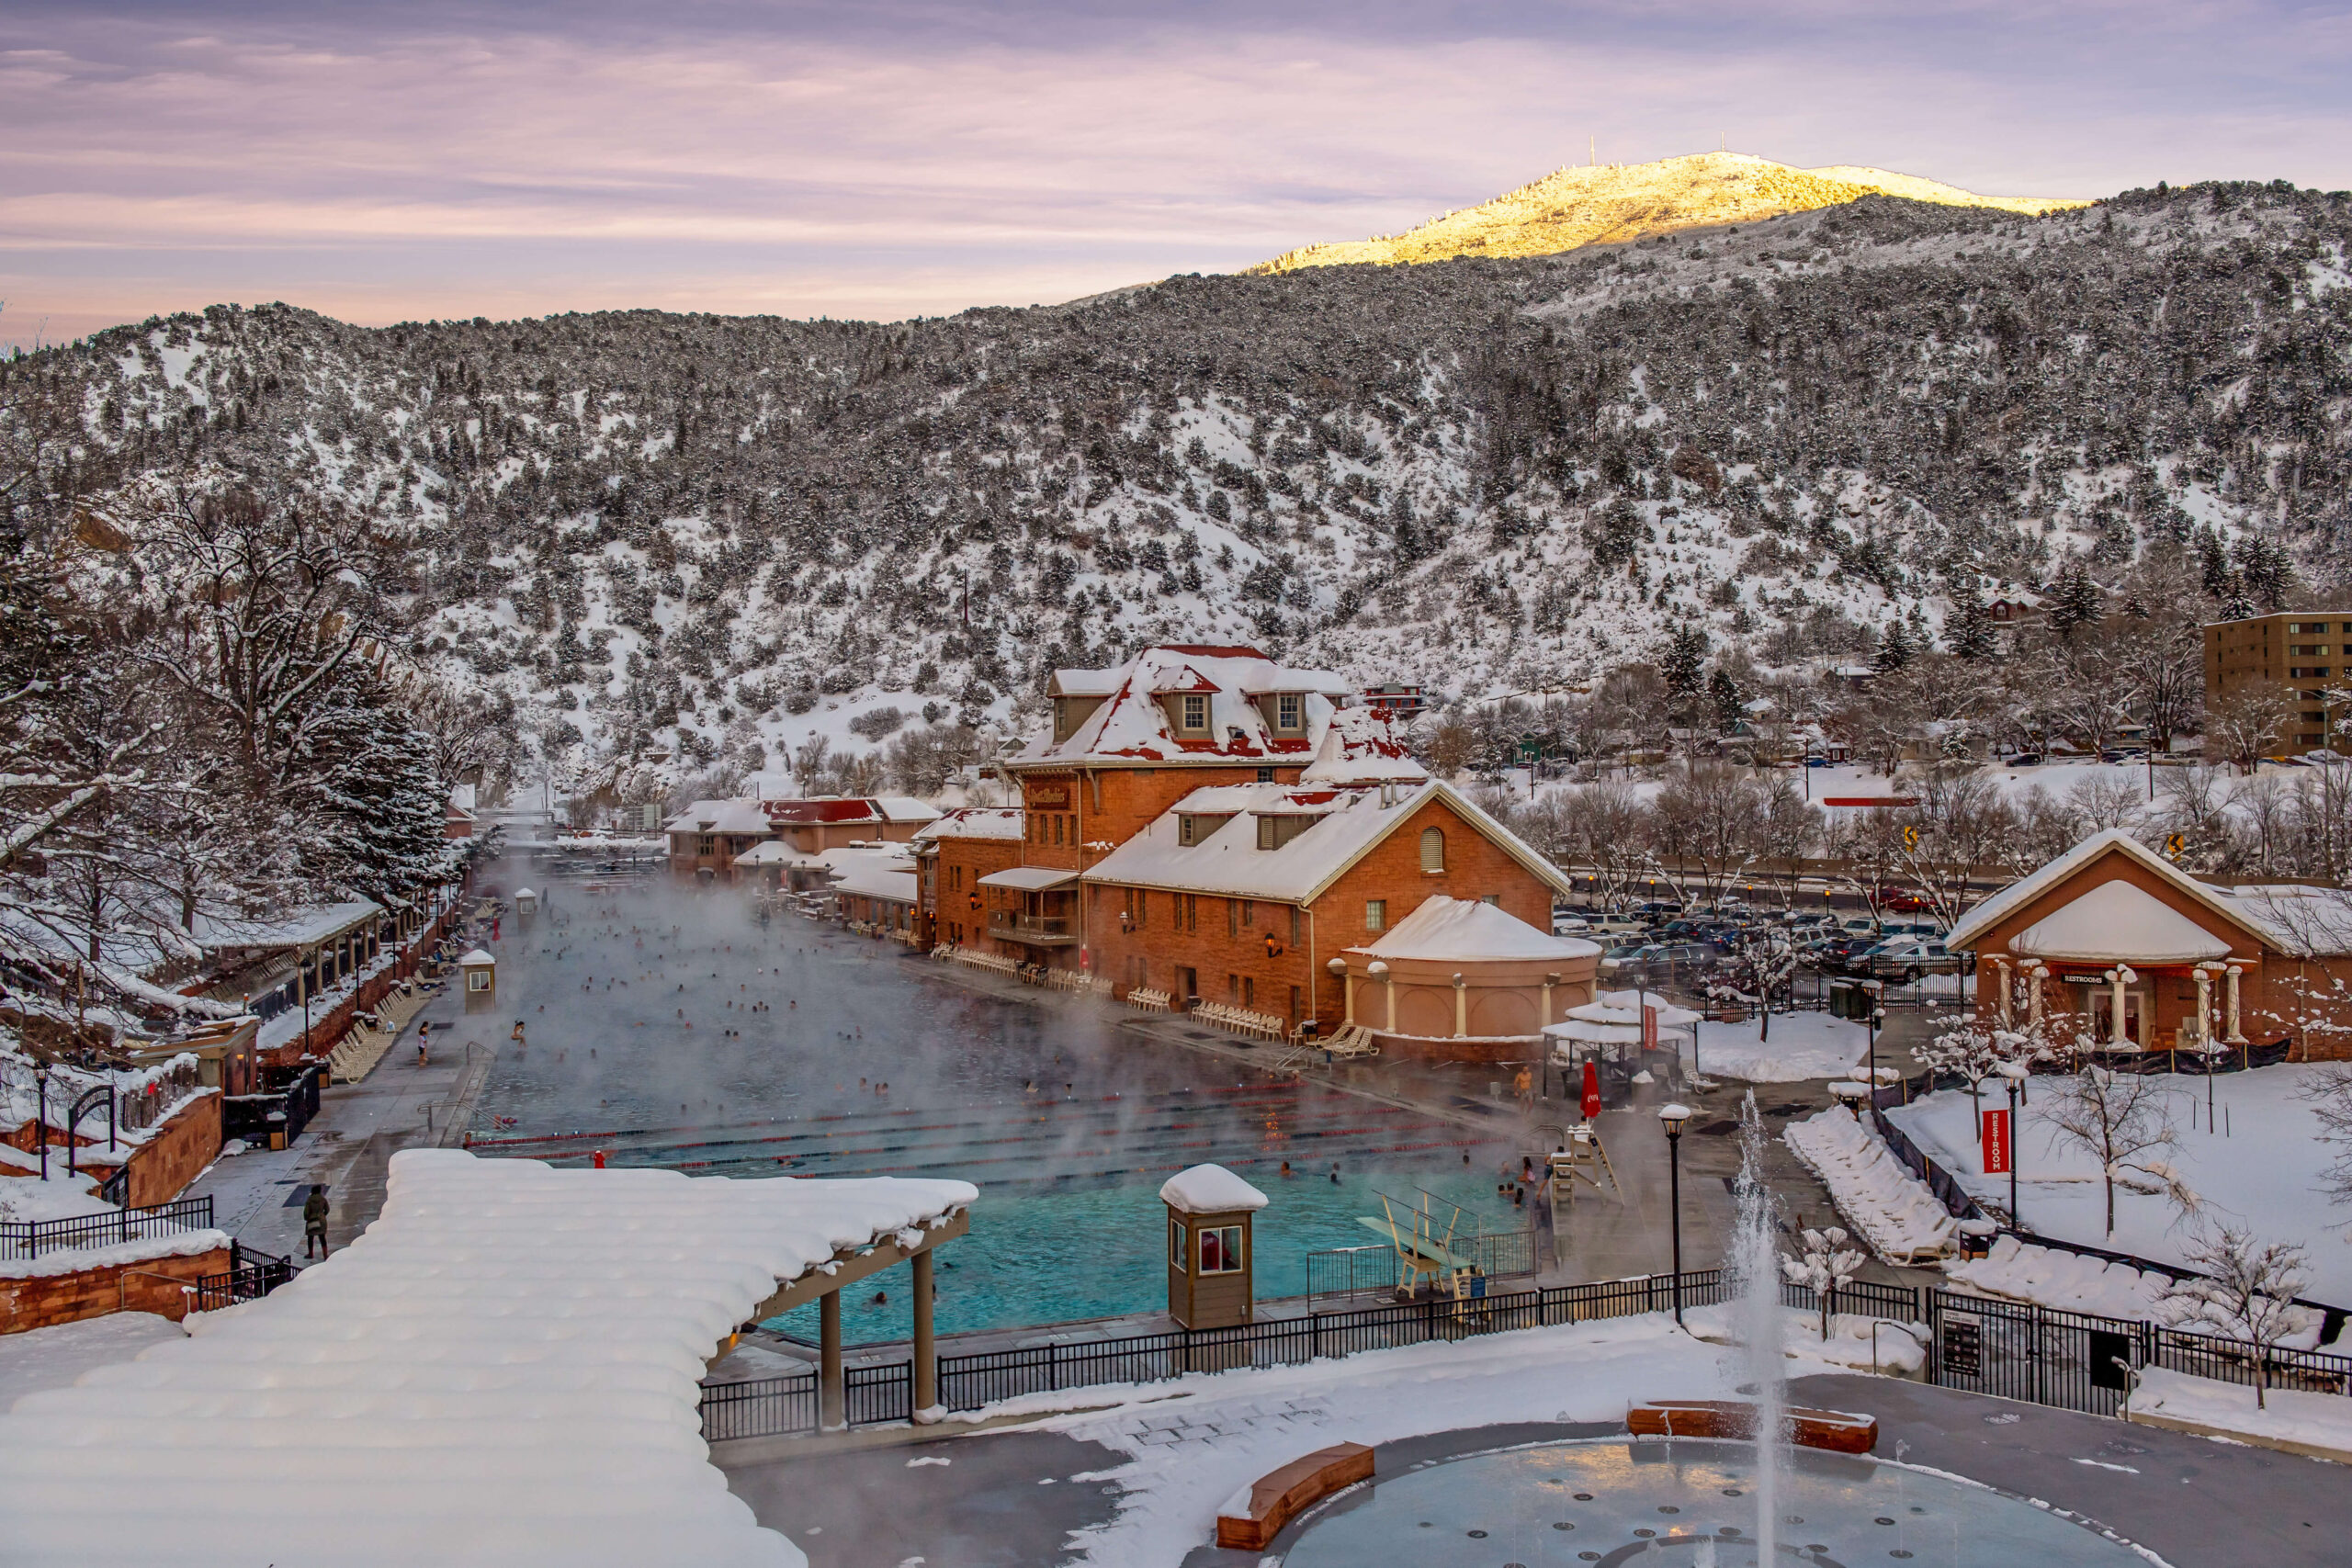 Capture the winter beauty of Glenwood Hot Springs pool from the pedestrian bridge, framed by snow-covered mountains. The tranquil scene unfolds as soothing hot springs mineral waters release steam, creating a serene contrast against the snowy landscape.